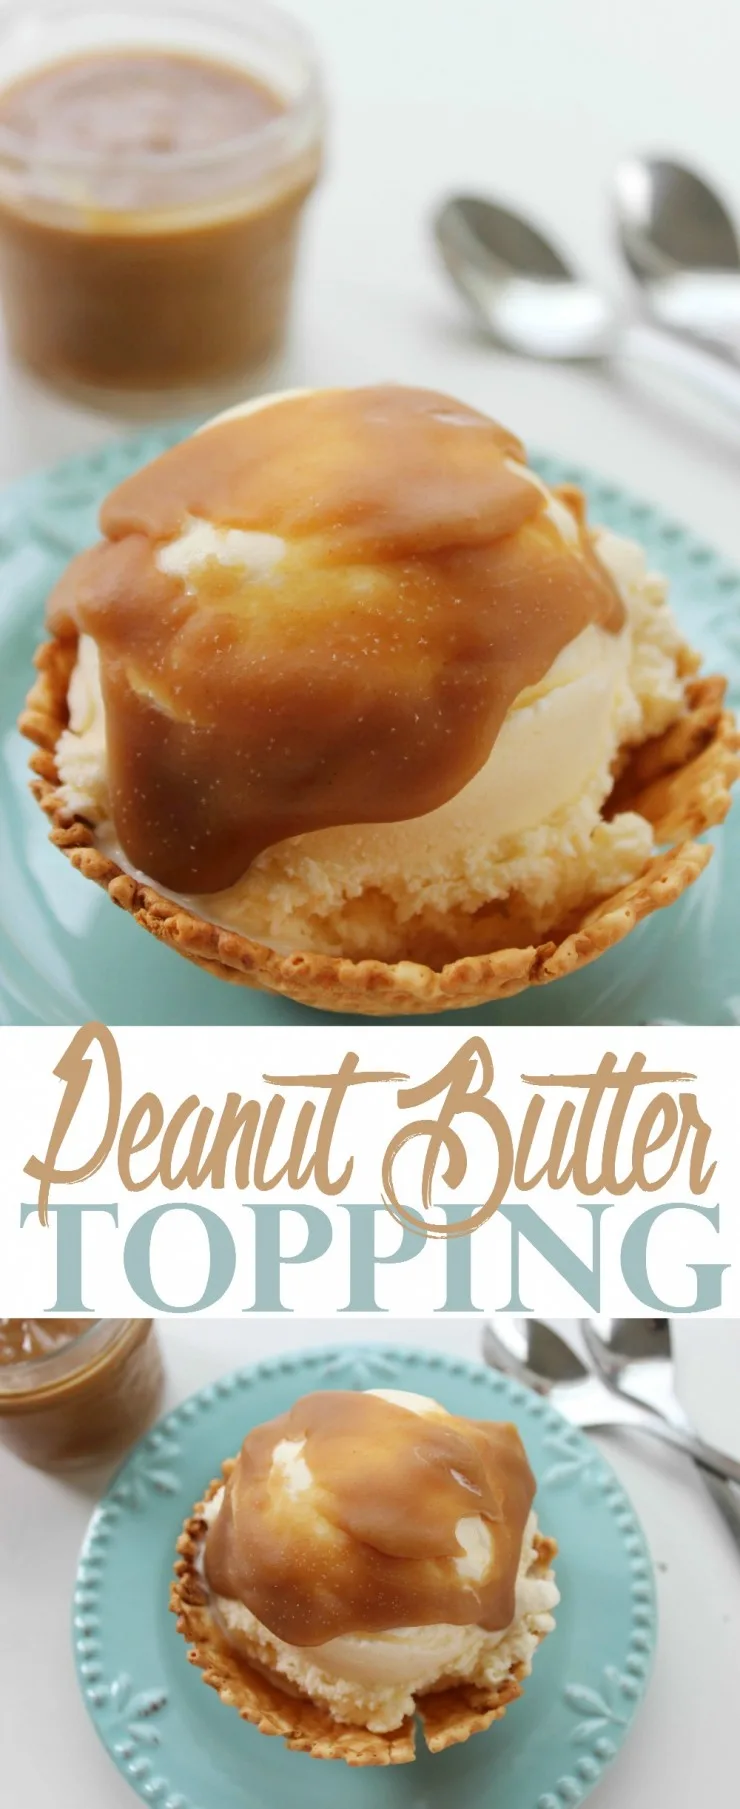  This Peanut Butter Topping is perfect for topping ice cream whether you opt for vanilla ice cream or a more adventurous ice cream flavour!